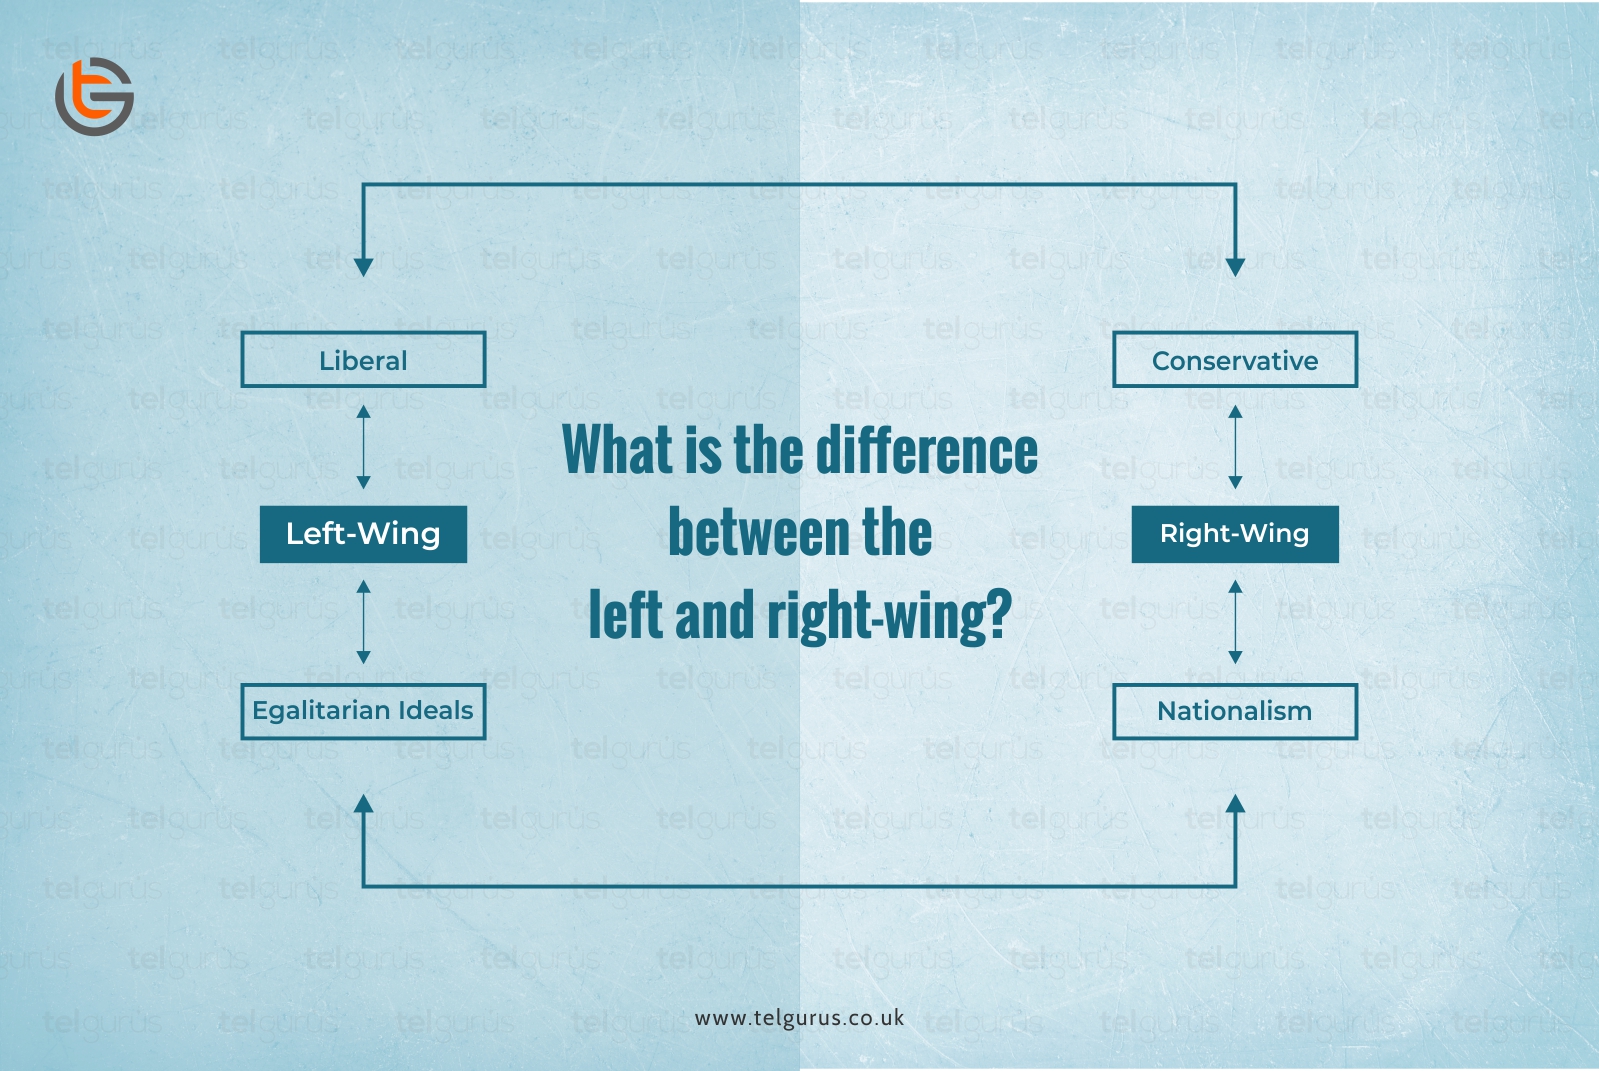 What is the difference between the left and right-wing?